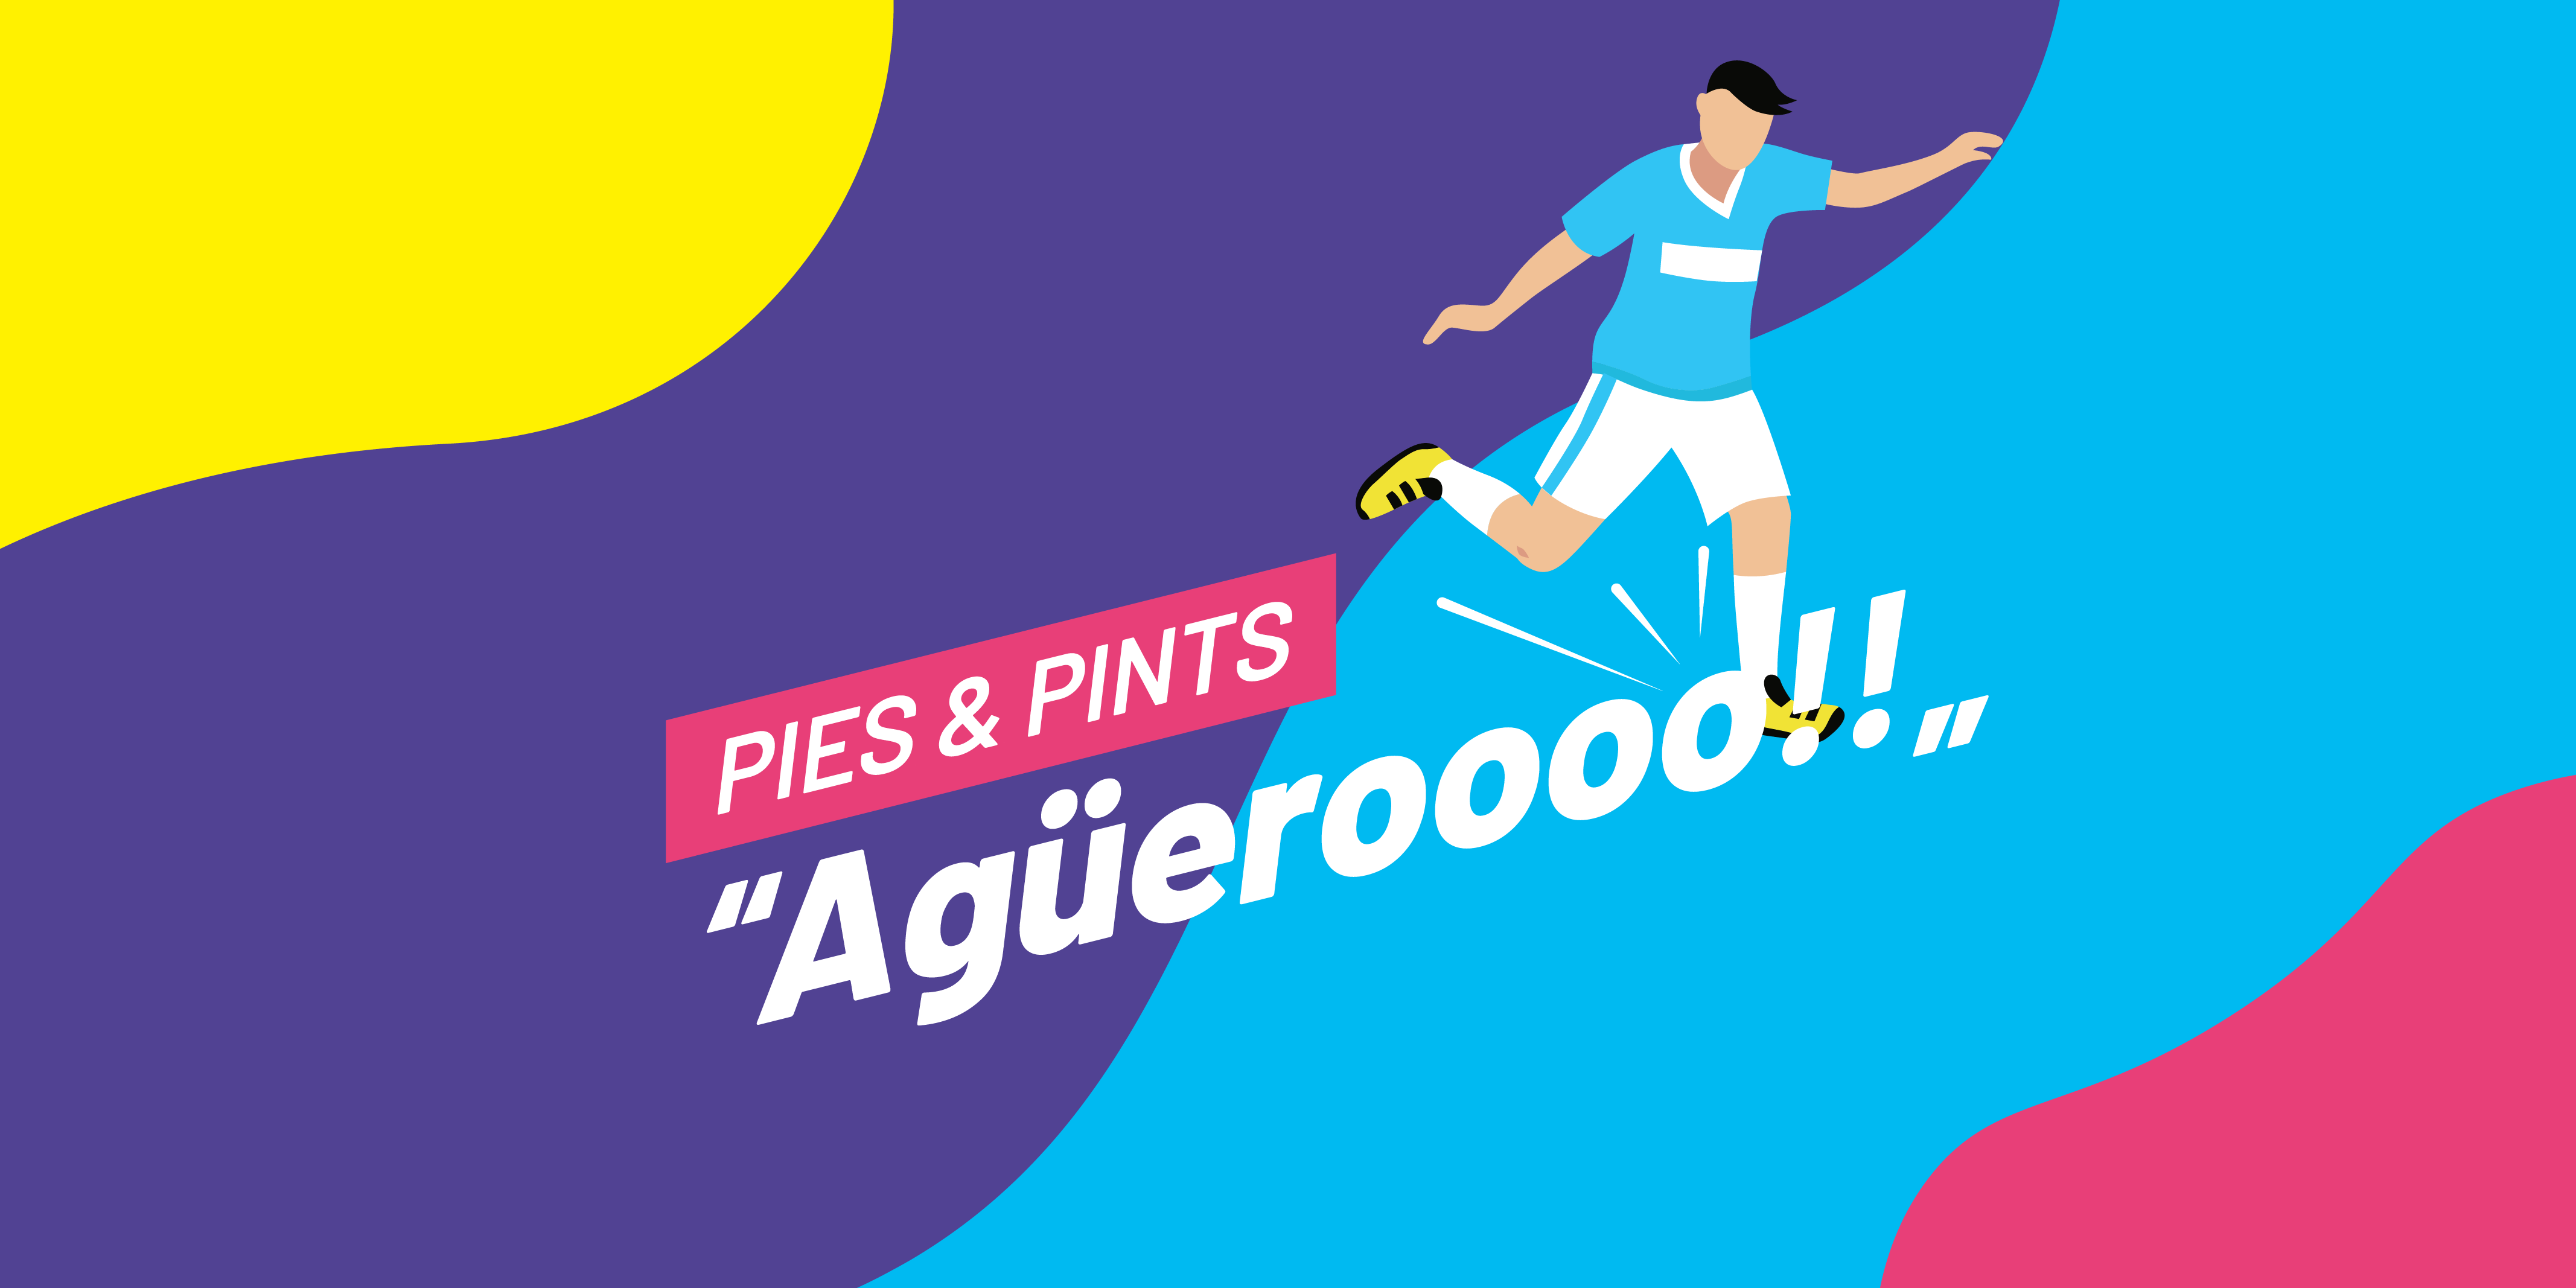 Pies and pints